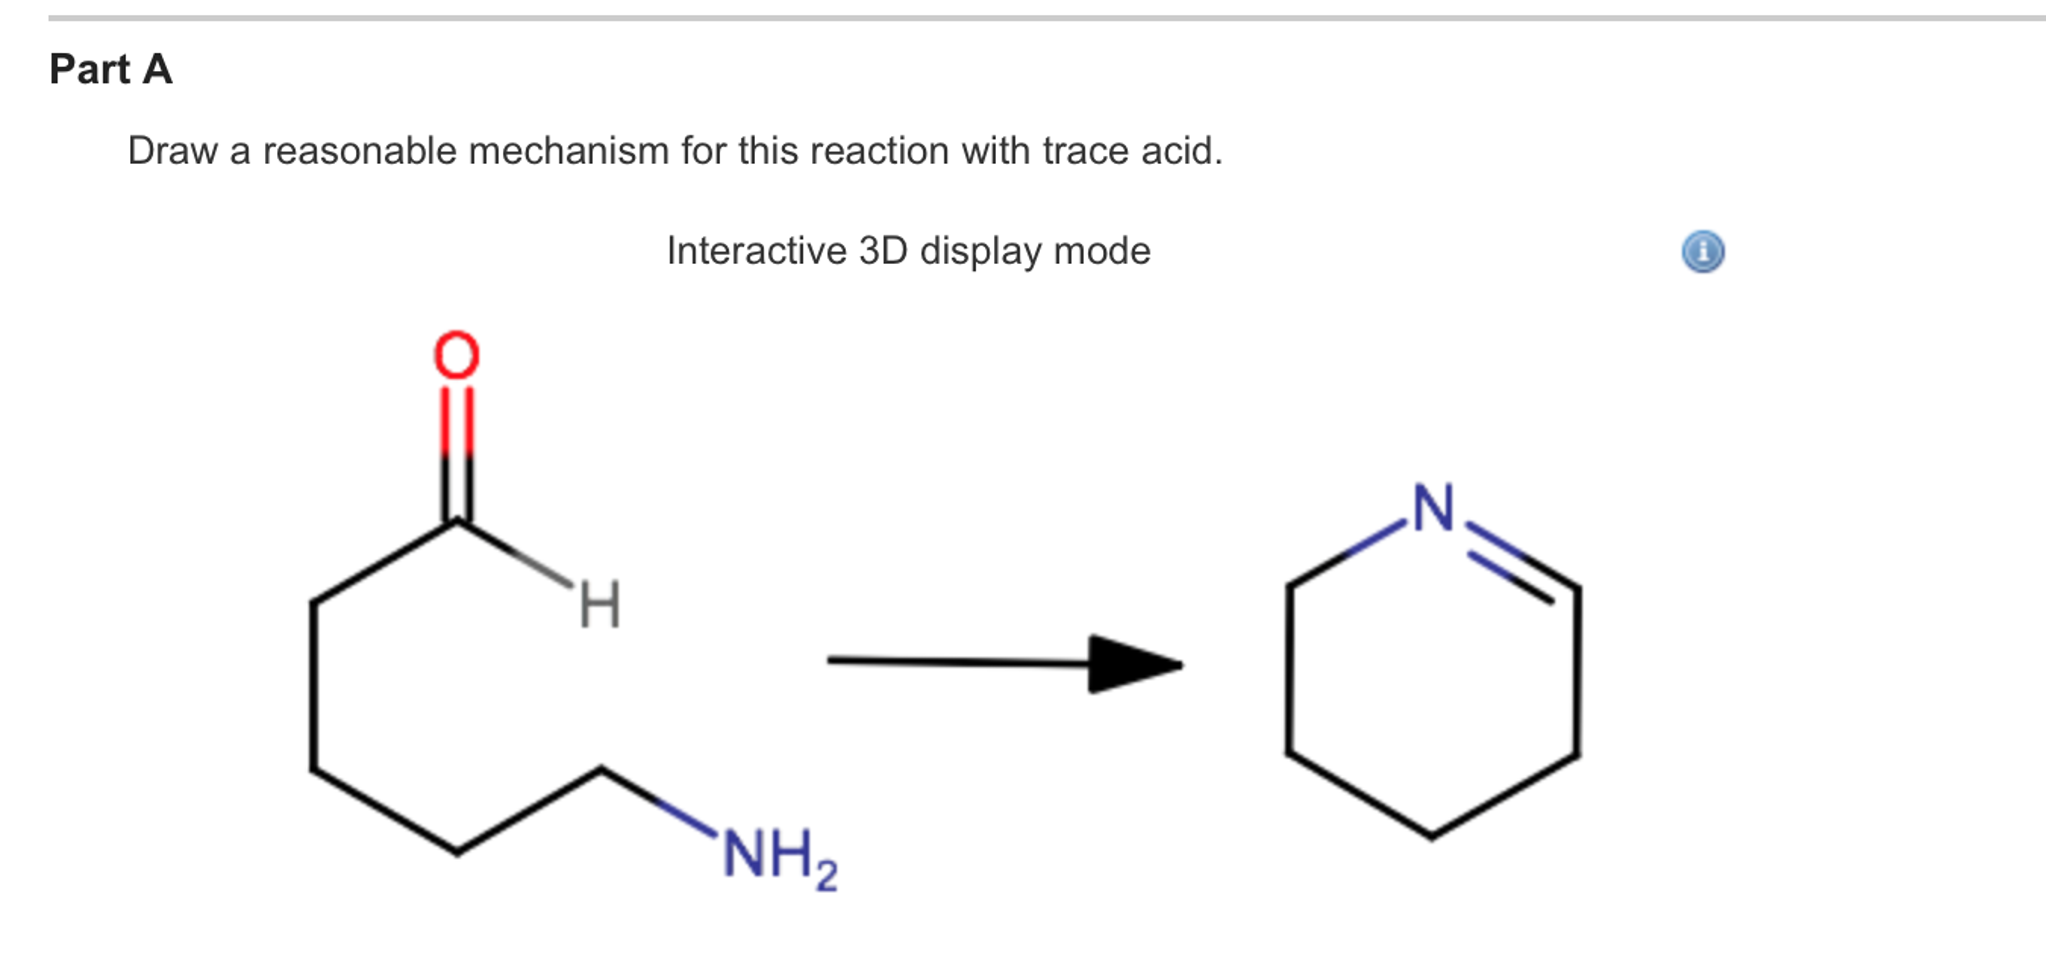 Draw a reasonable mechanism for this reaction with